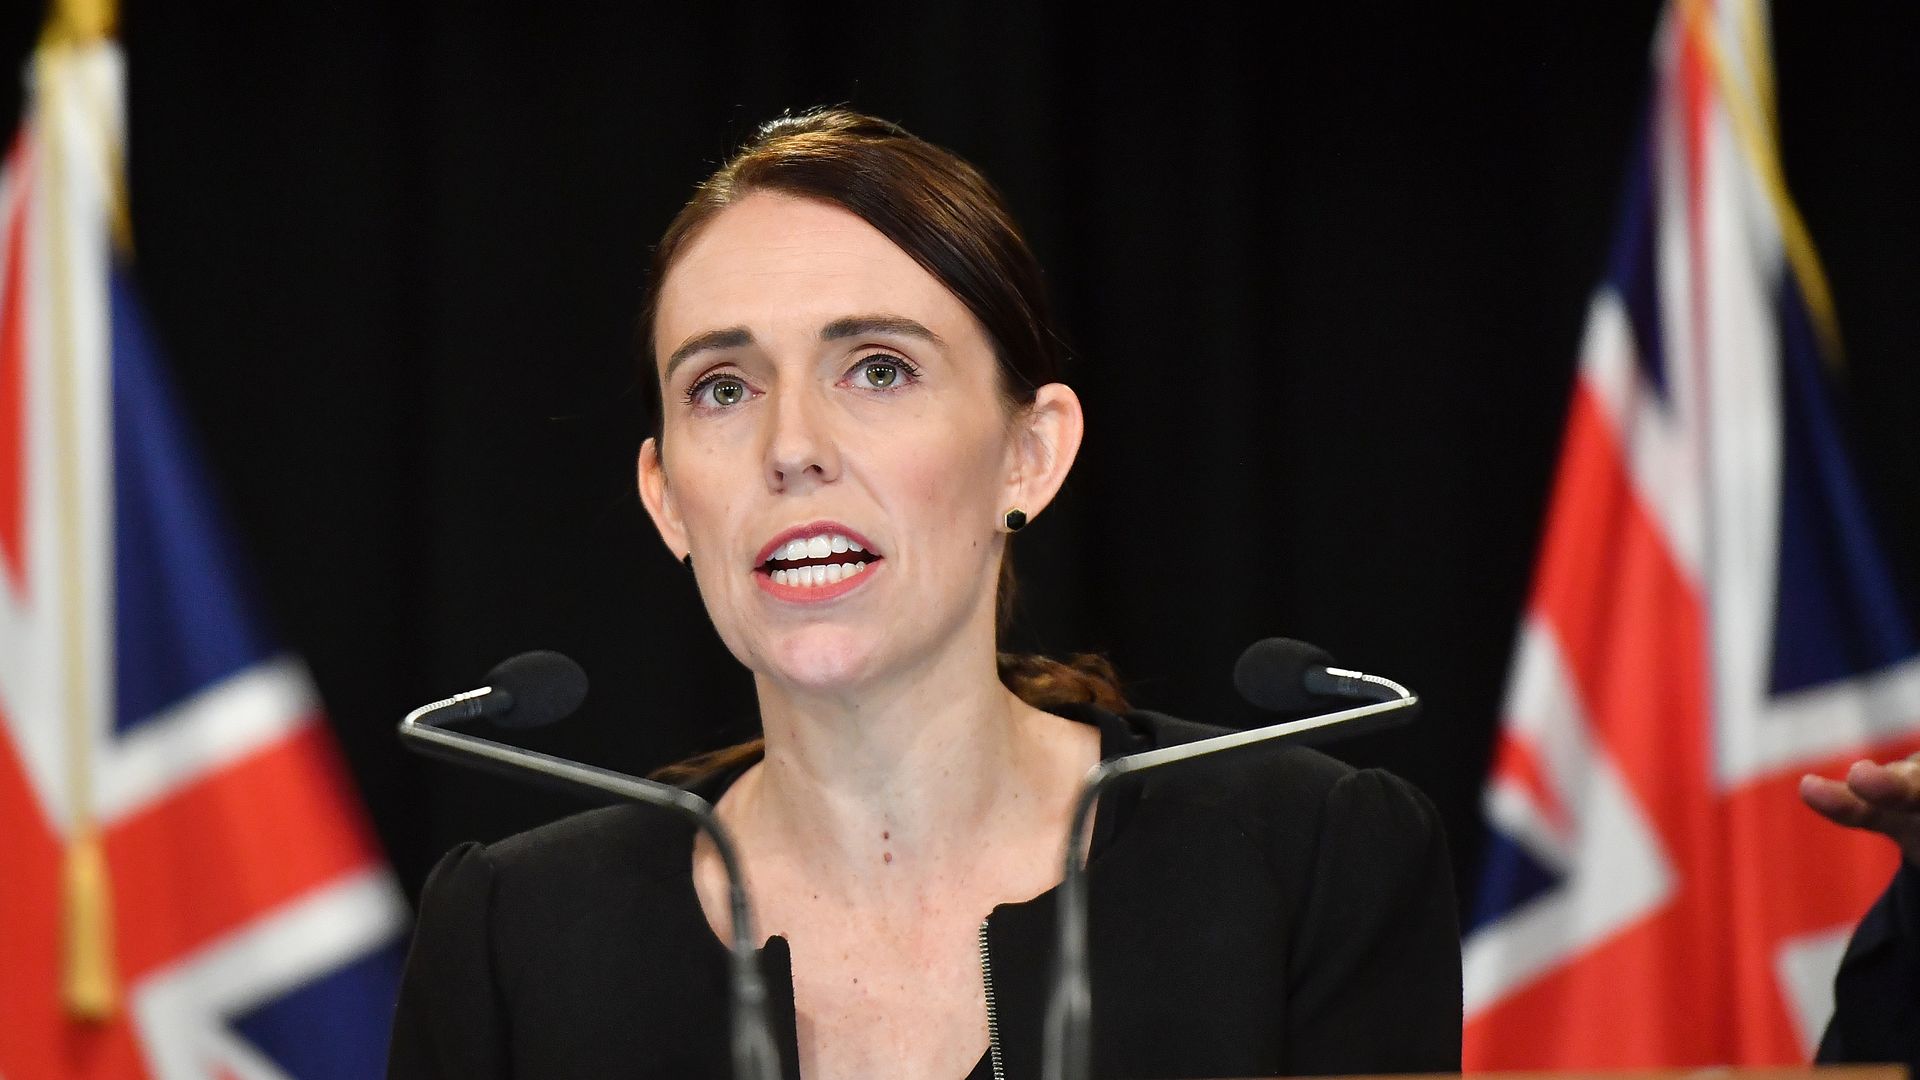 Jacinda Ardern has vowed to change the gun laws quickly.